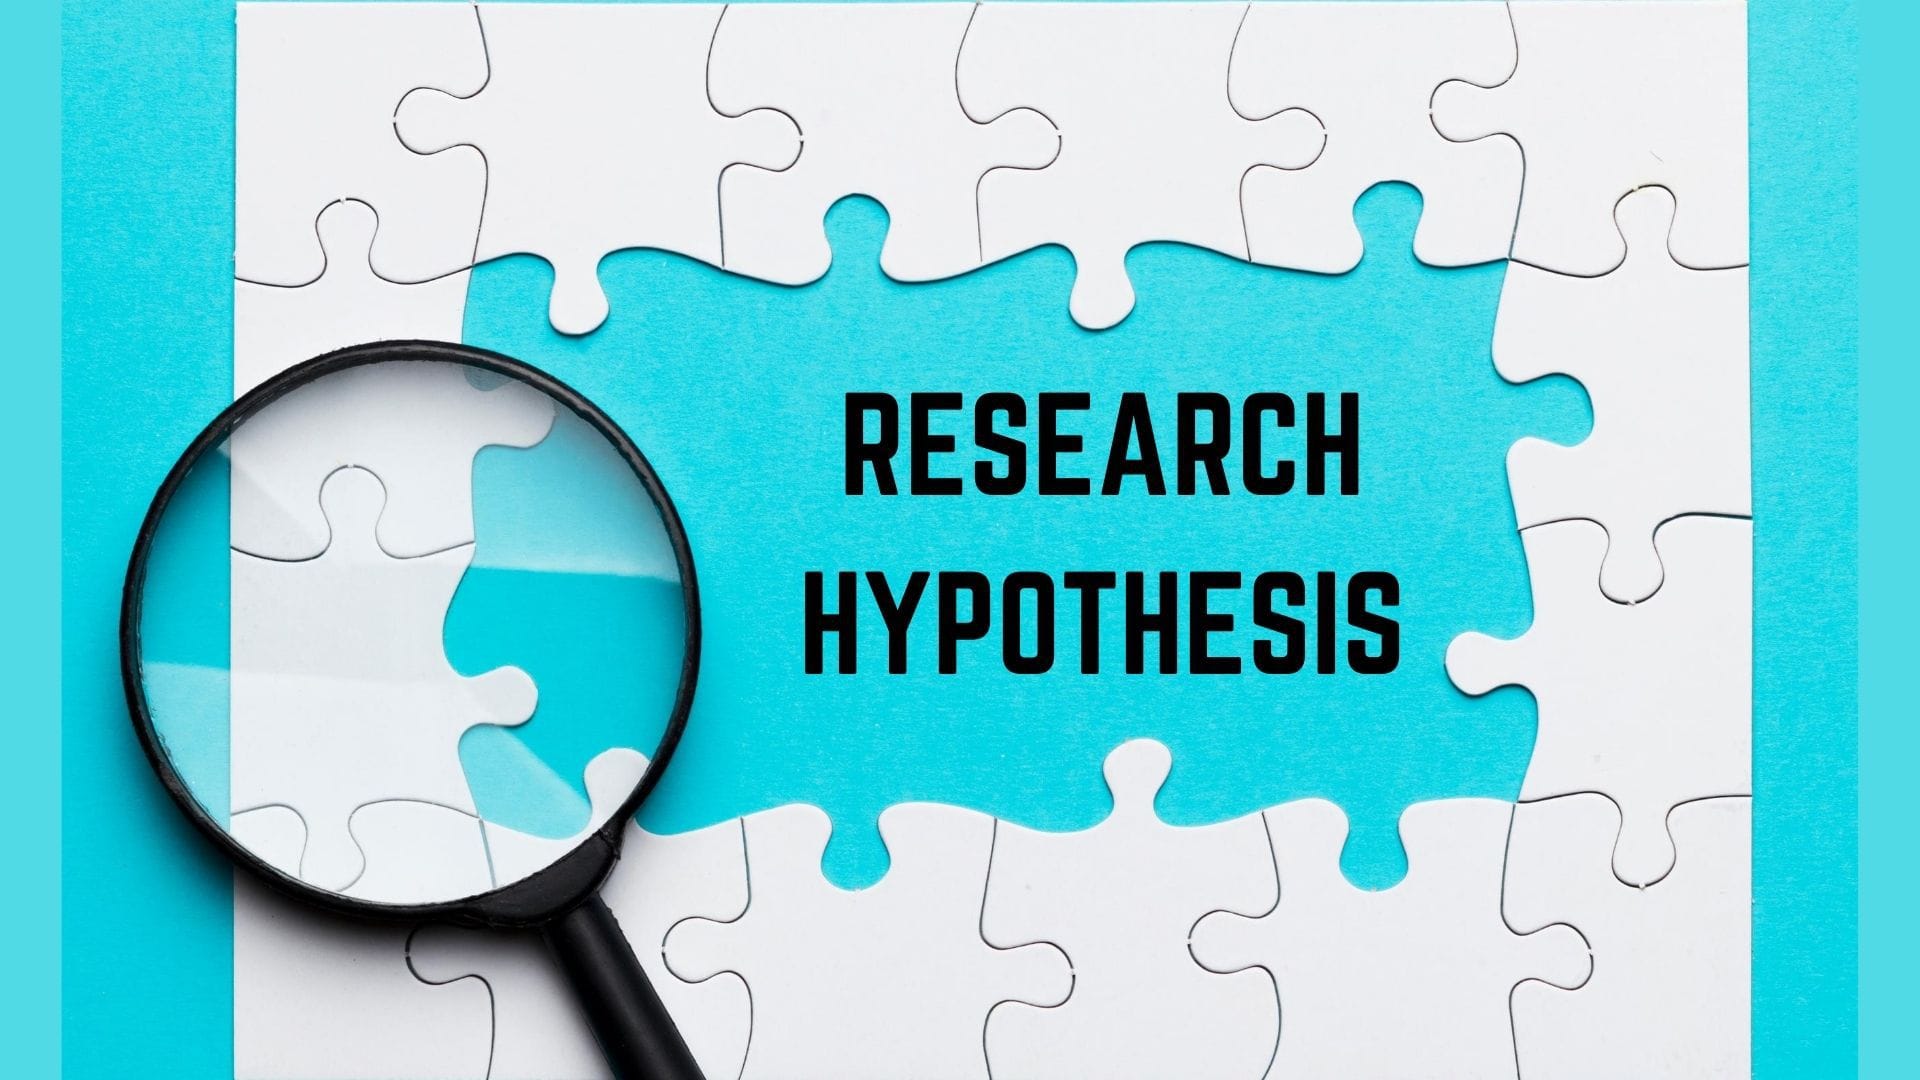 the research hypothesis should be stated as the